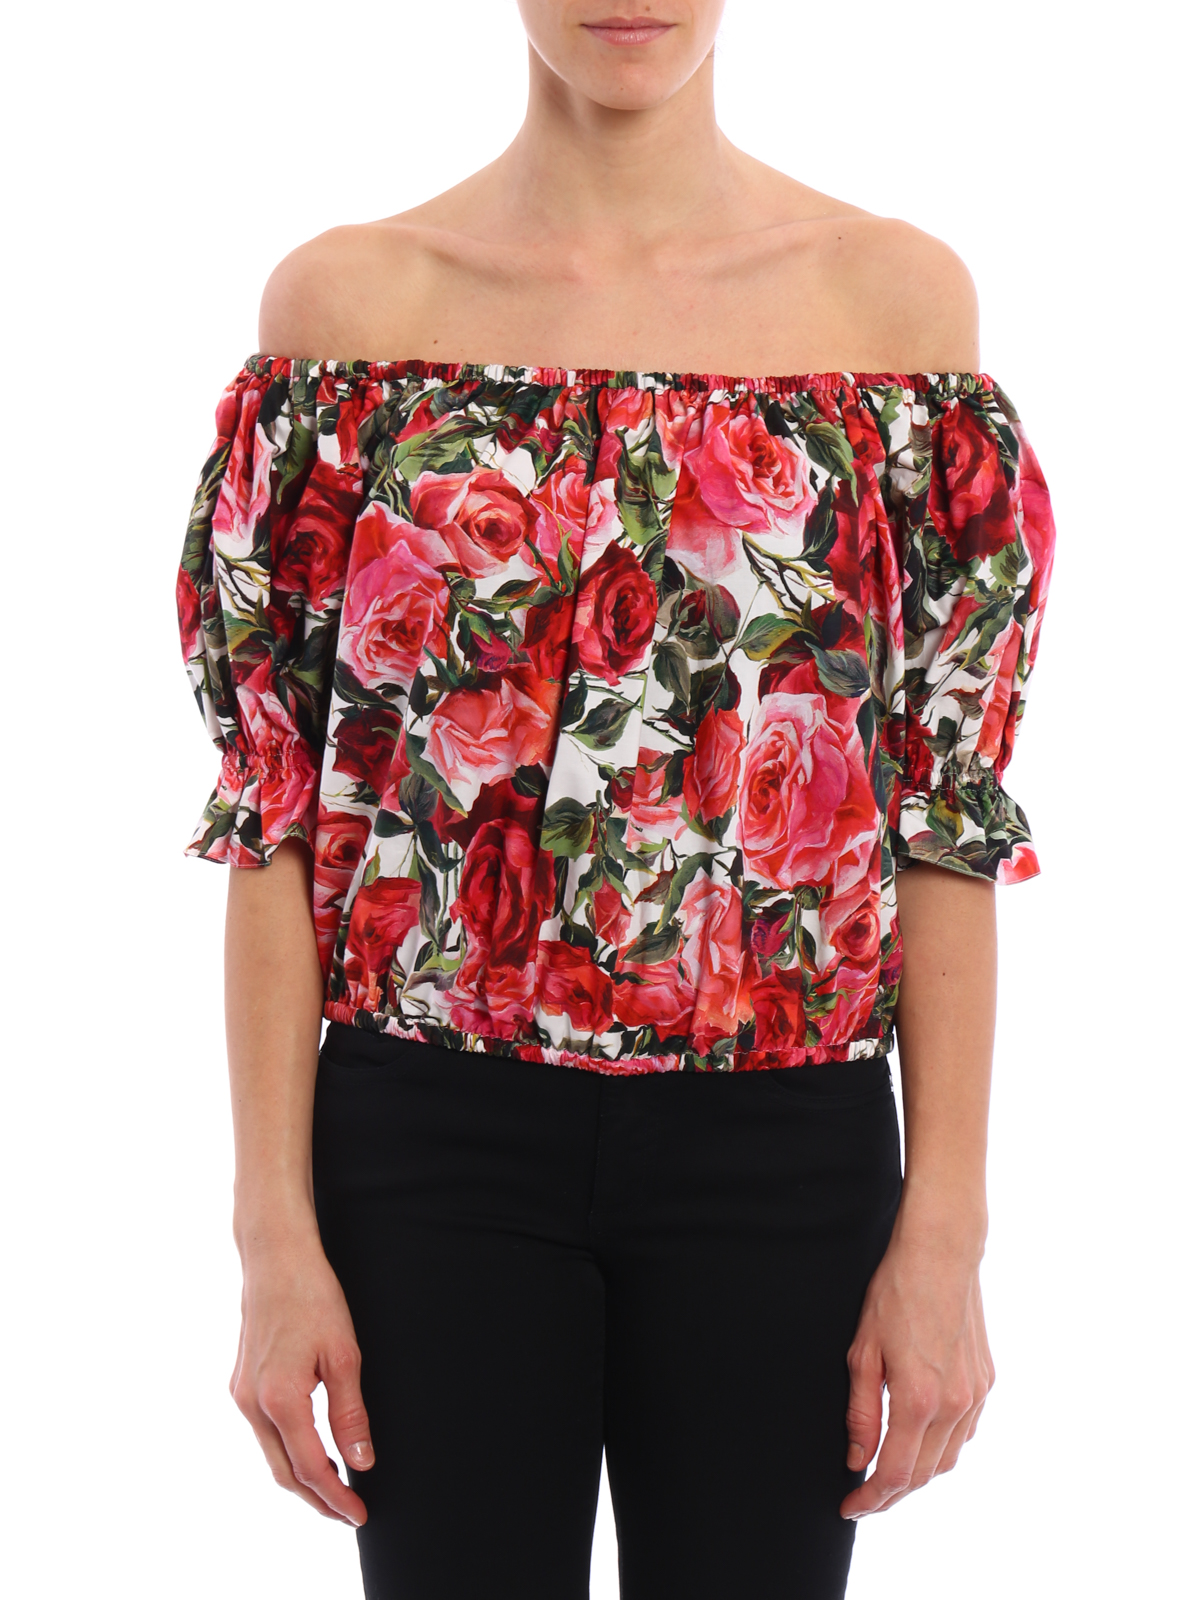 dolce and gabbana off the shoulder top